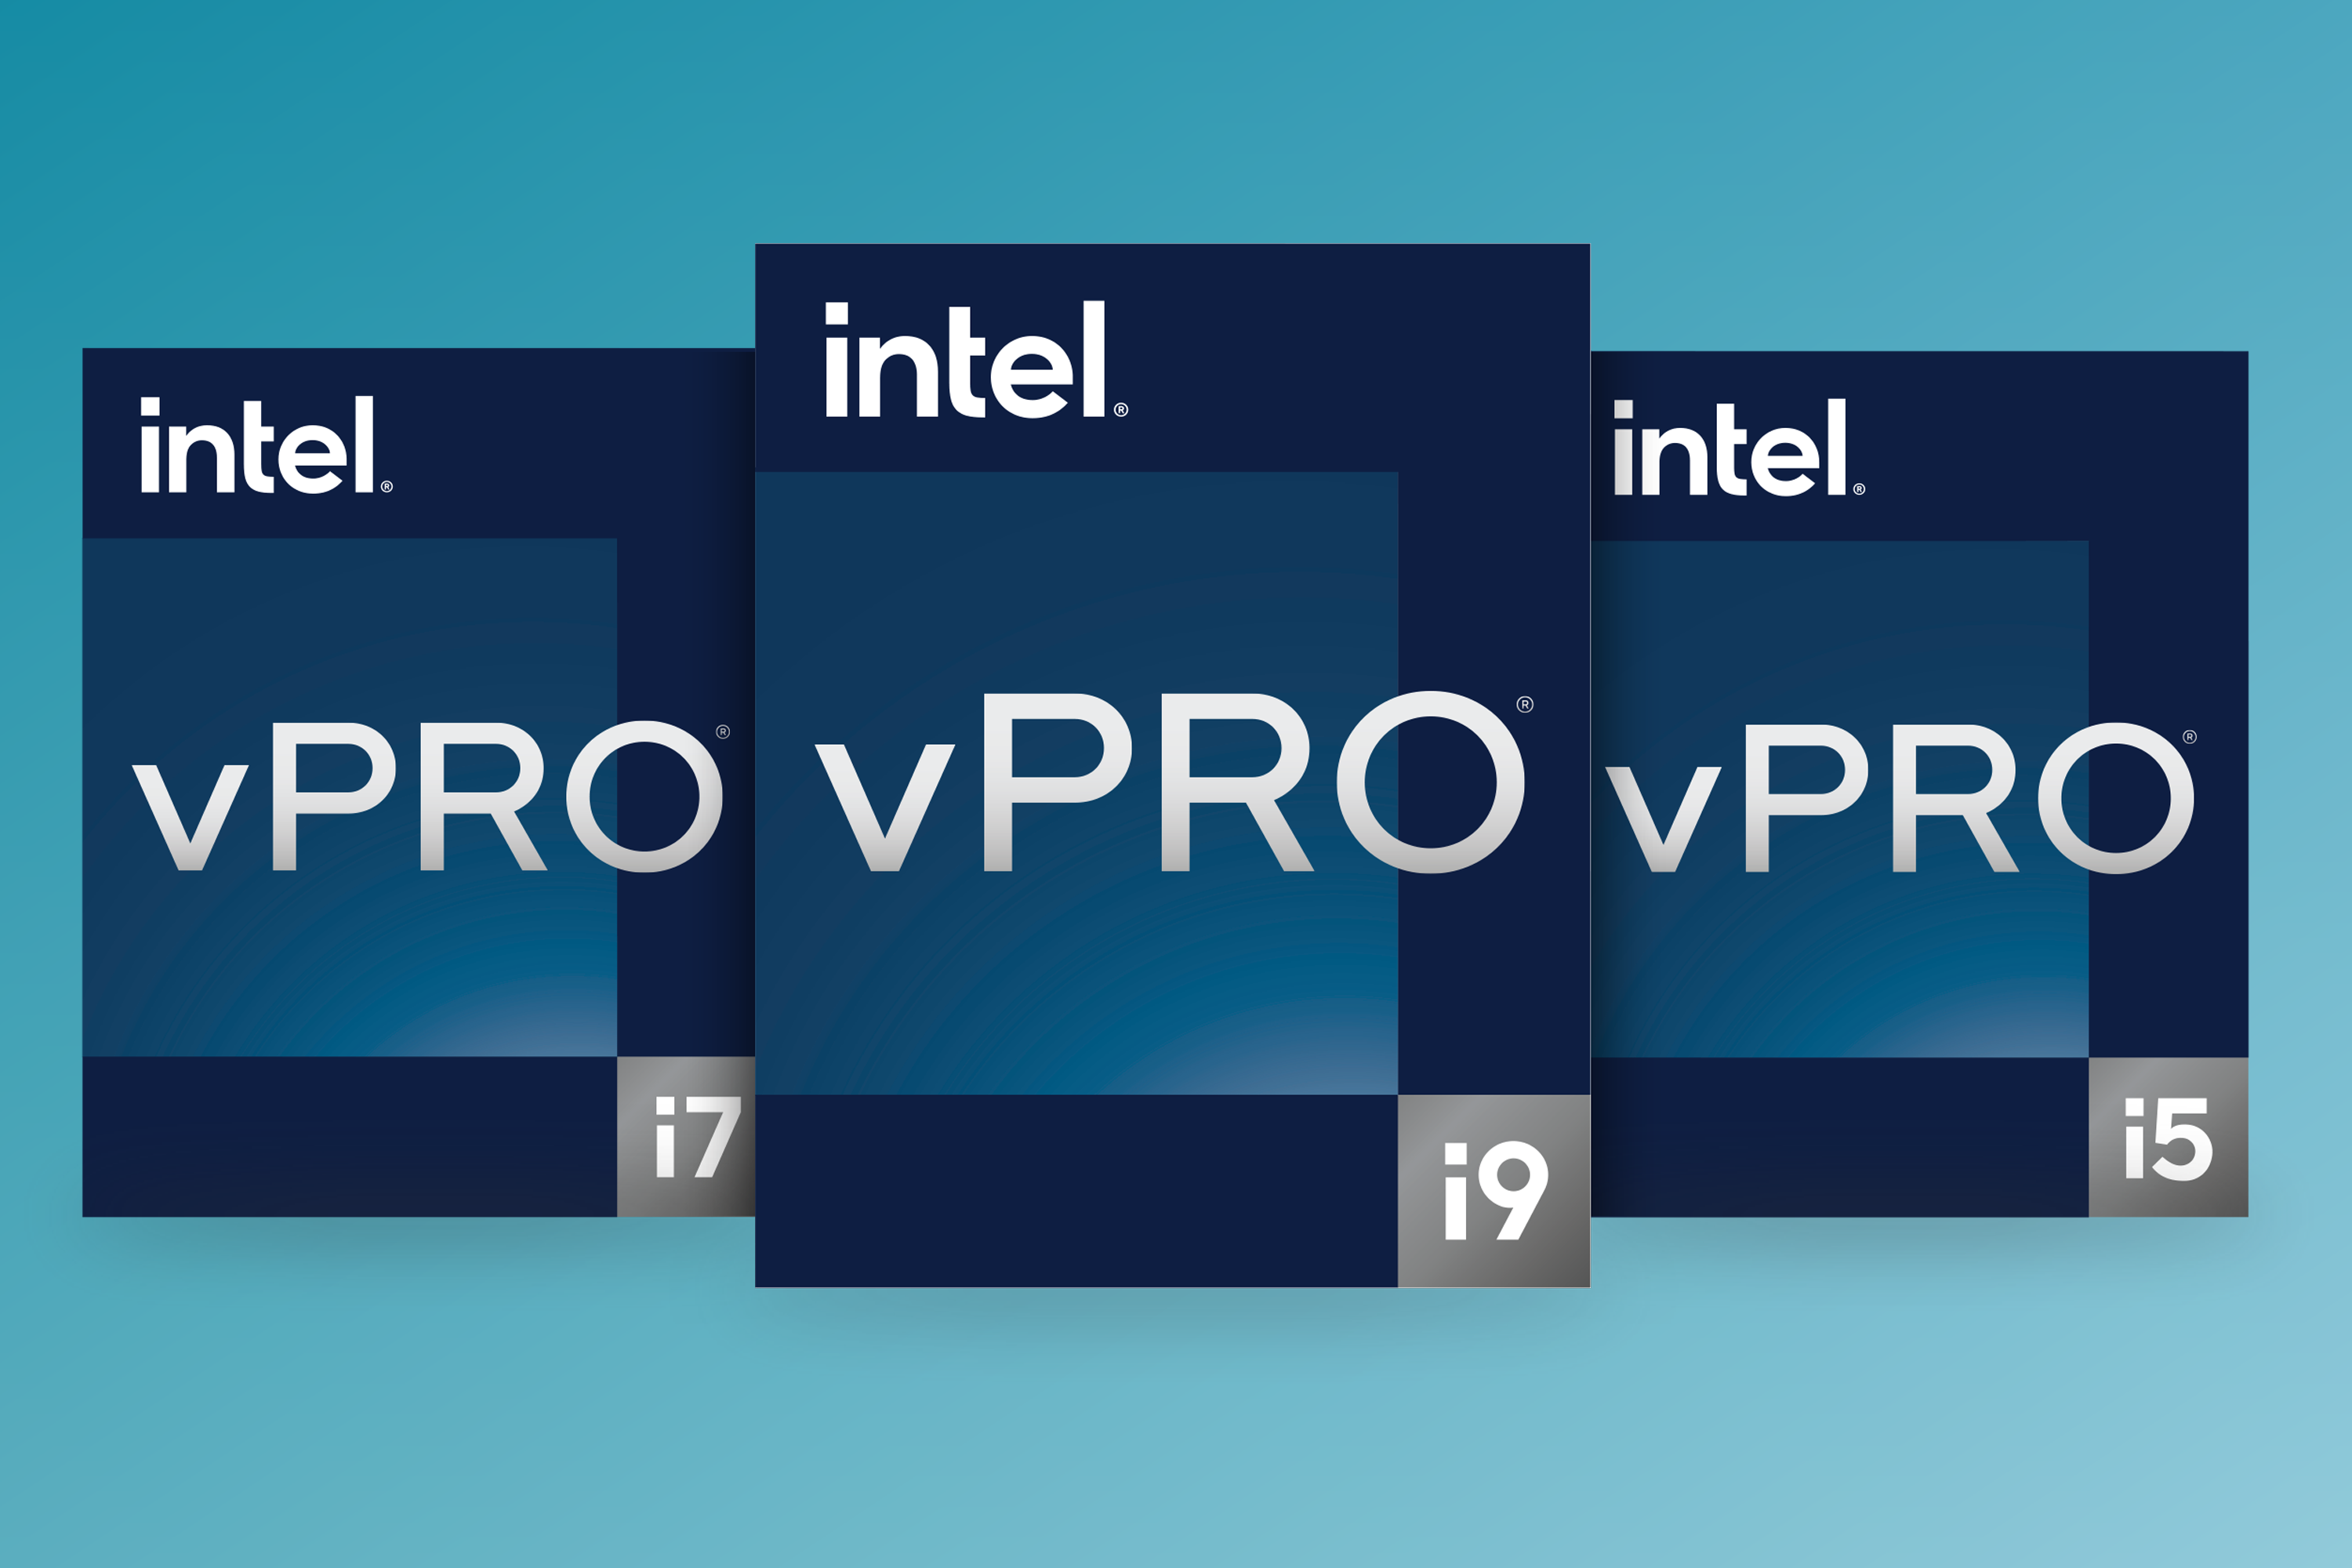 Logos for Intel Core i5, Core i7, and Corei9 processors with vPro